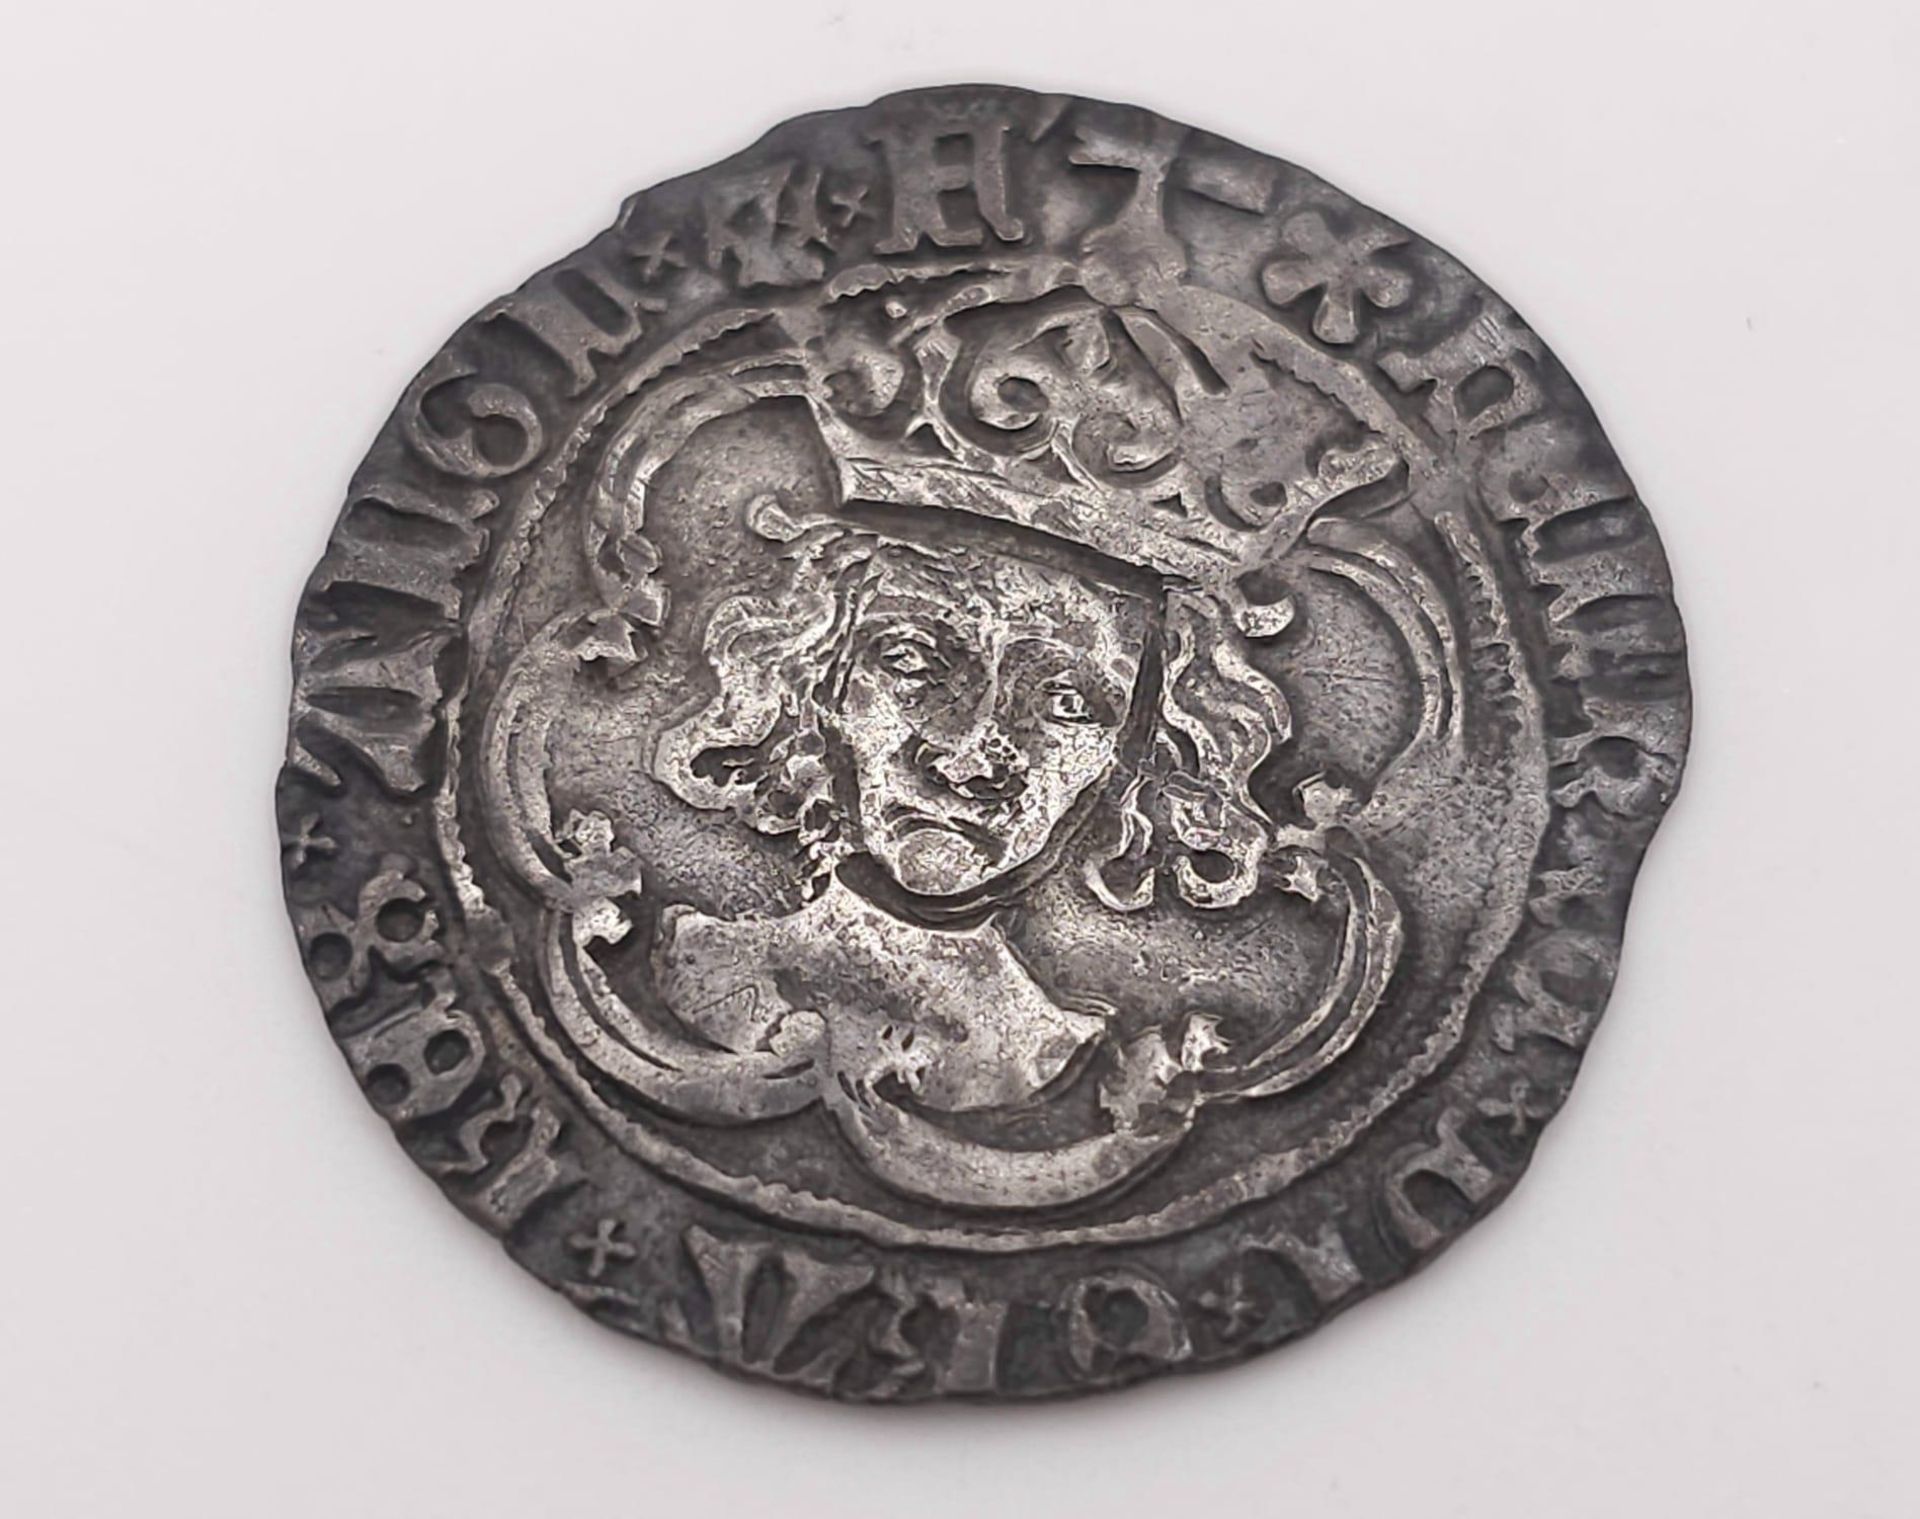 A Henry VII (1485-1603) Silver Groat Hammered Coin. Please see photos for conditions. S2199. - Image 6 of 8